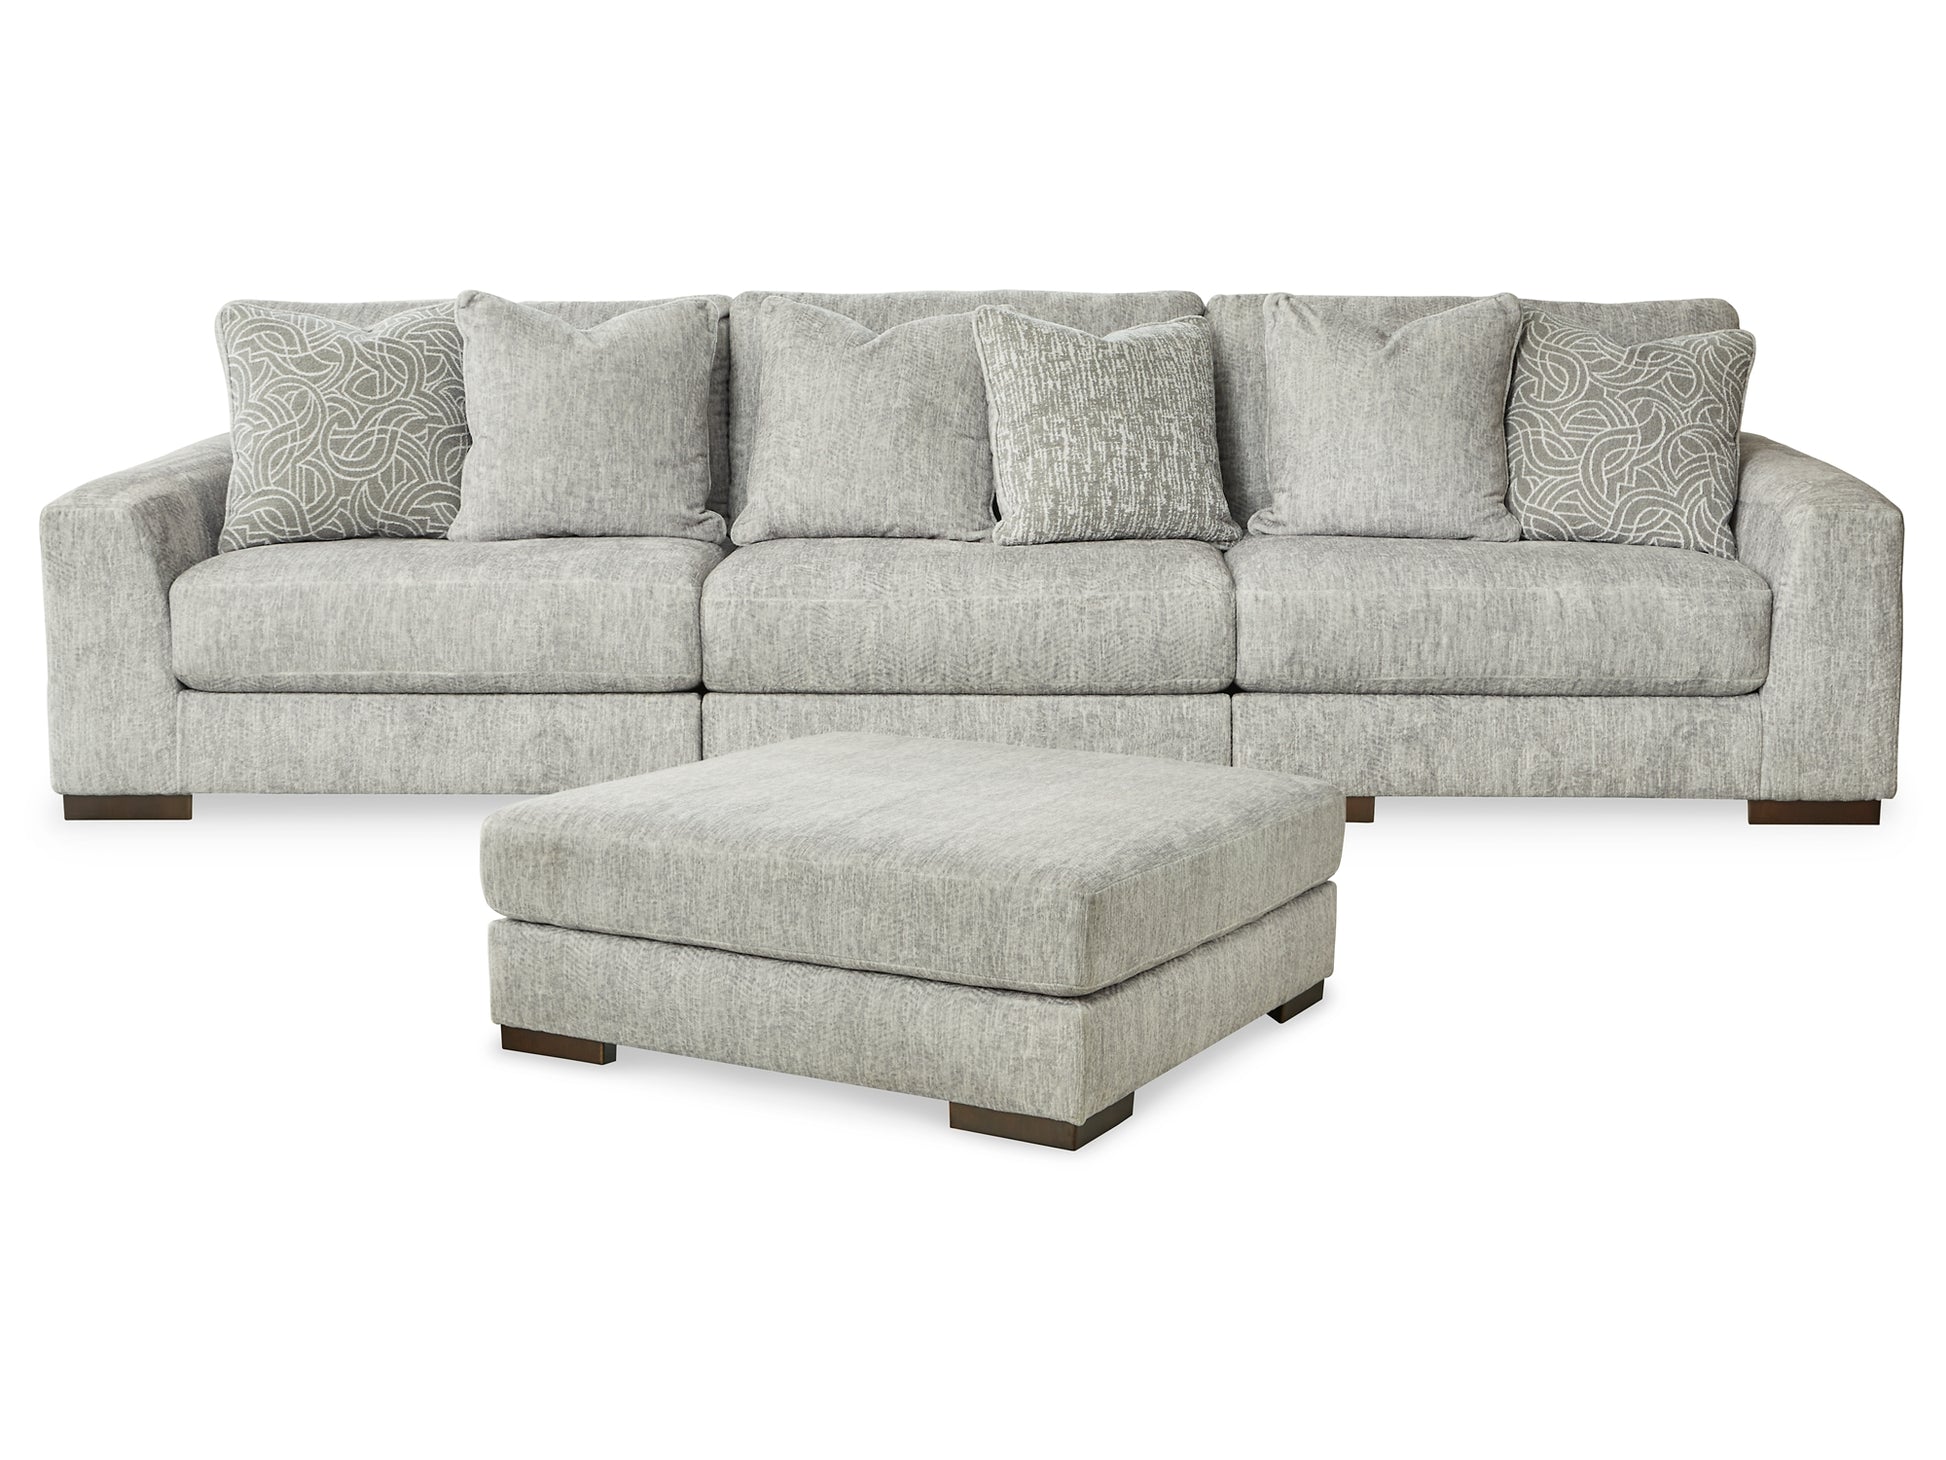 Regent Park 3-Piece Sectional with Ottoman Signature Design by Ashley®